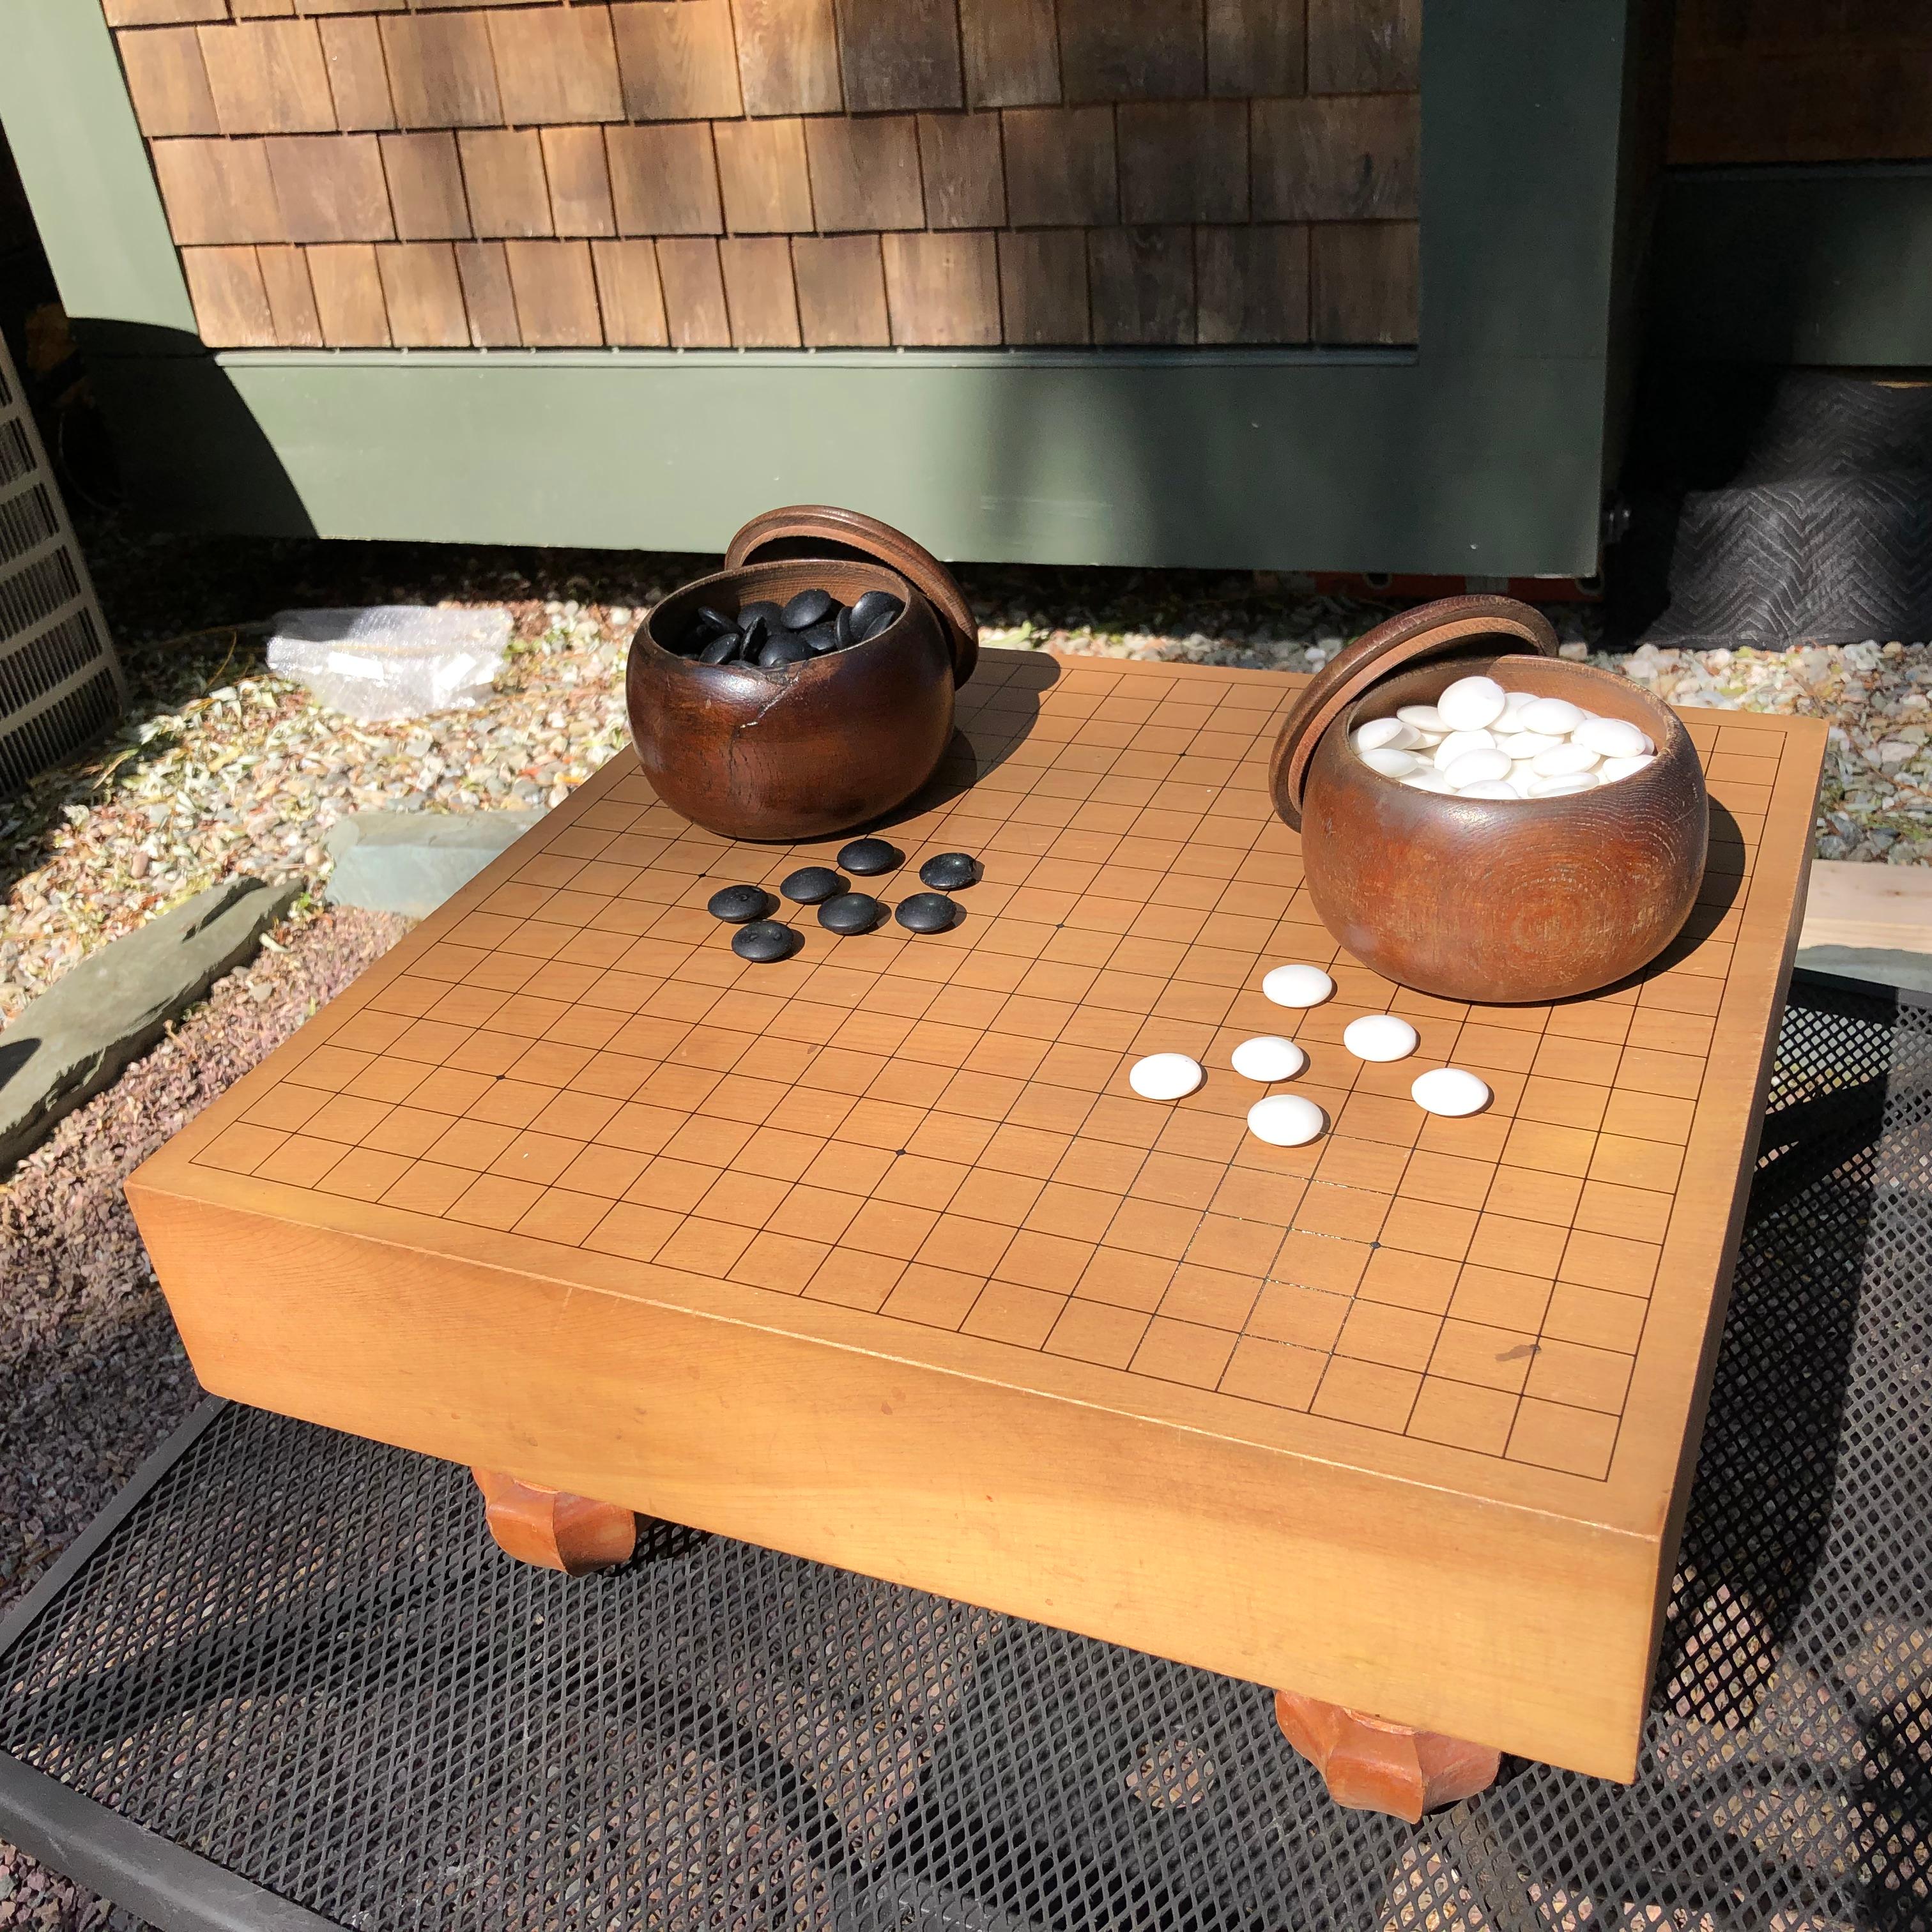 From our recent Japanese travels

This is a scarce and fun complete Japanese antique wooden goban “GO” board, circa 1915, handcrafted of Kaya wood.  It comes complete with the  original wood 